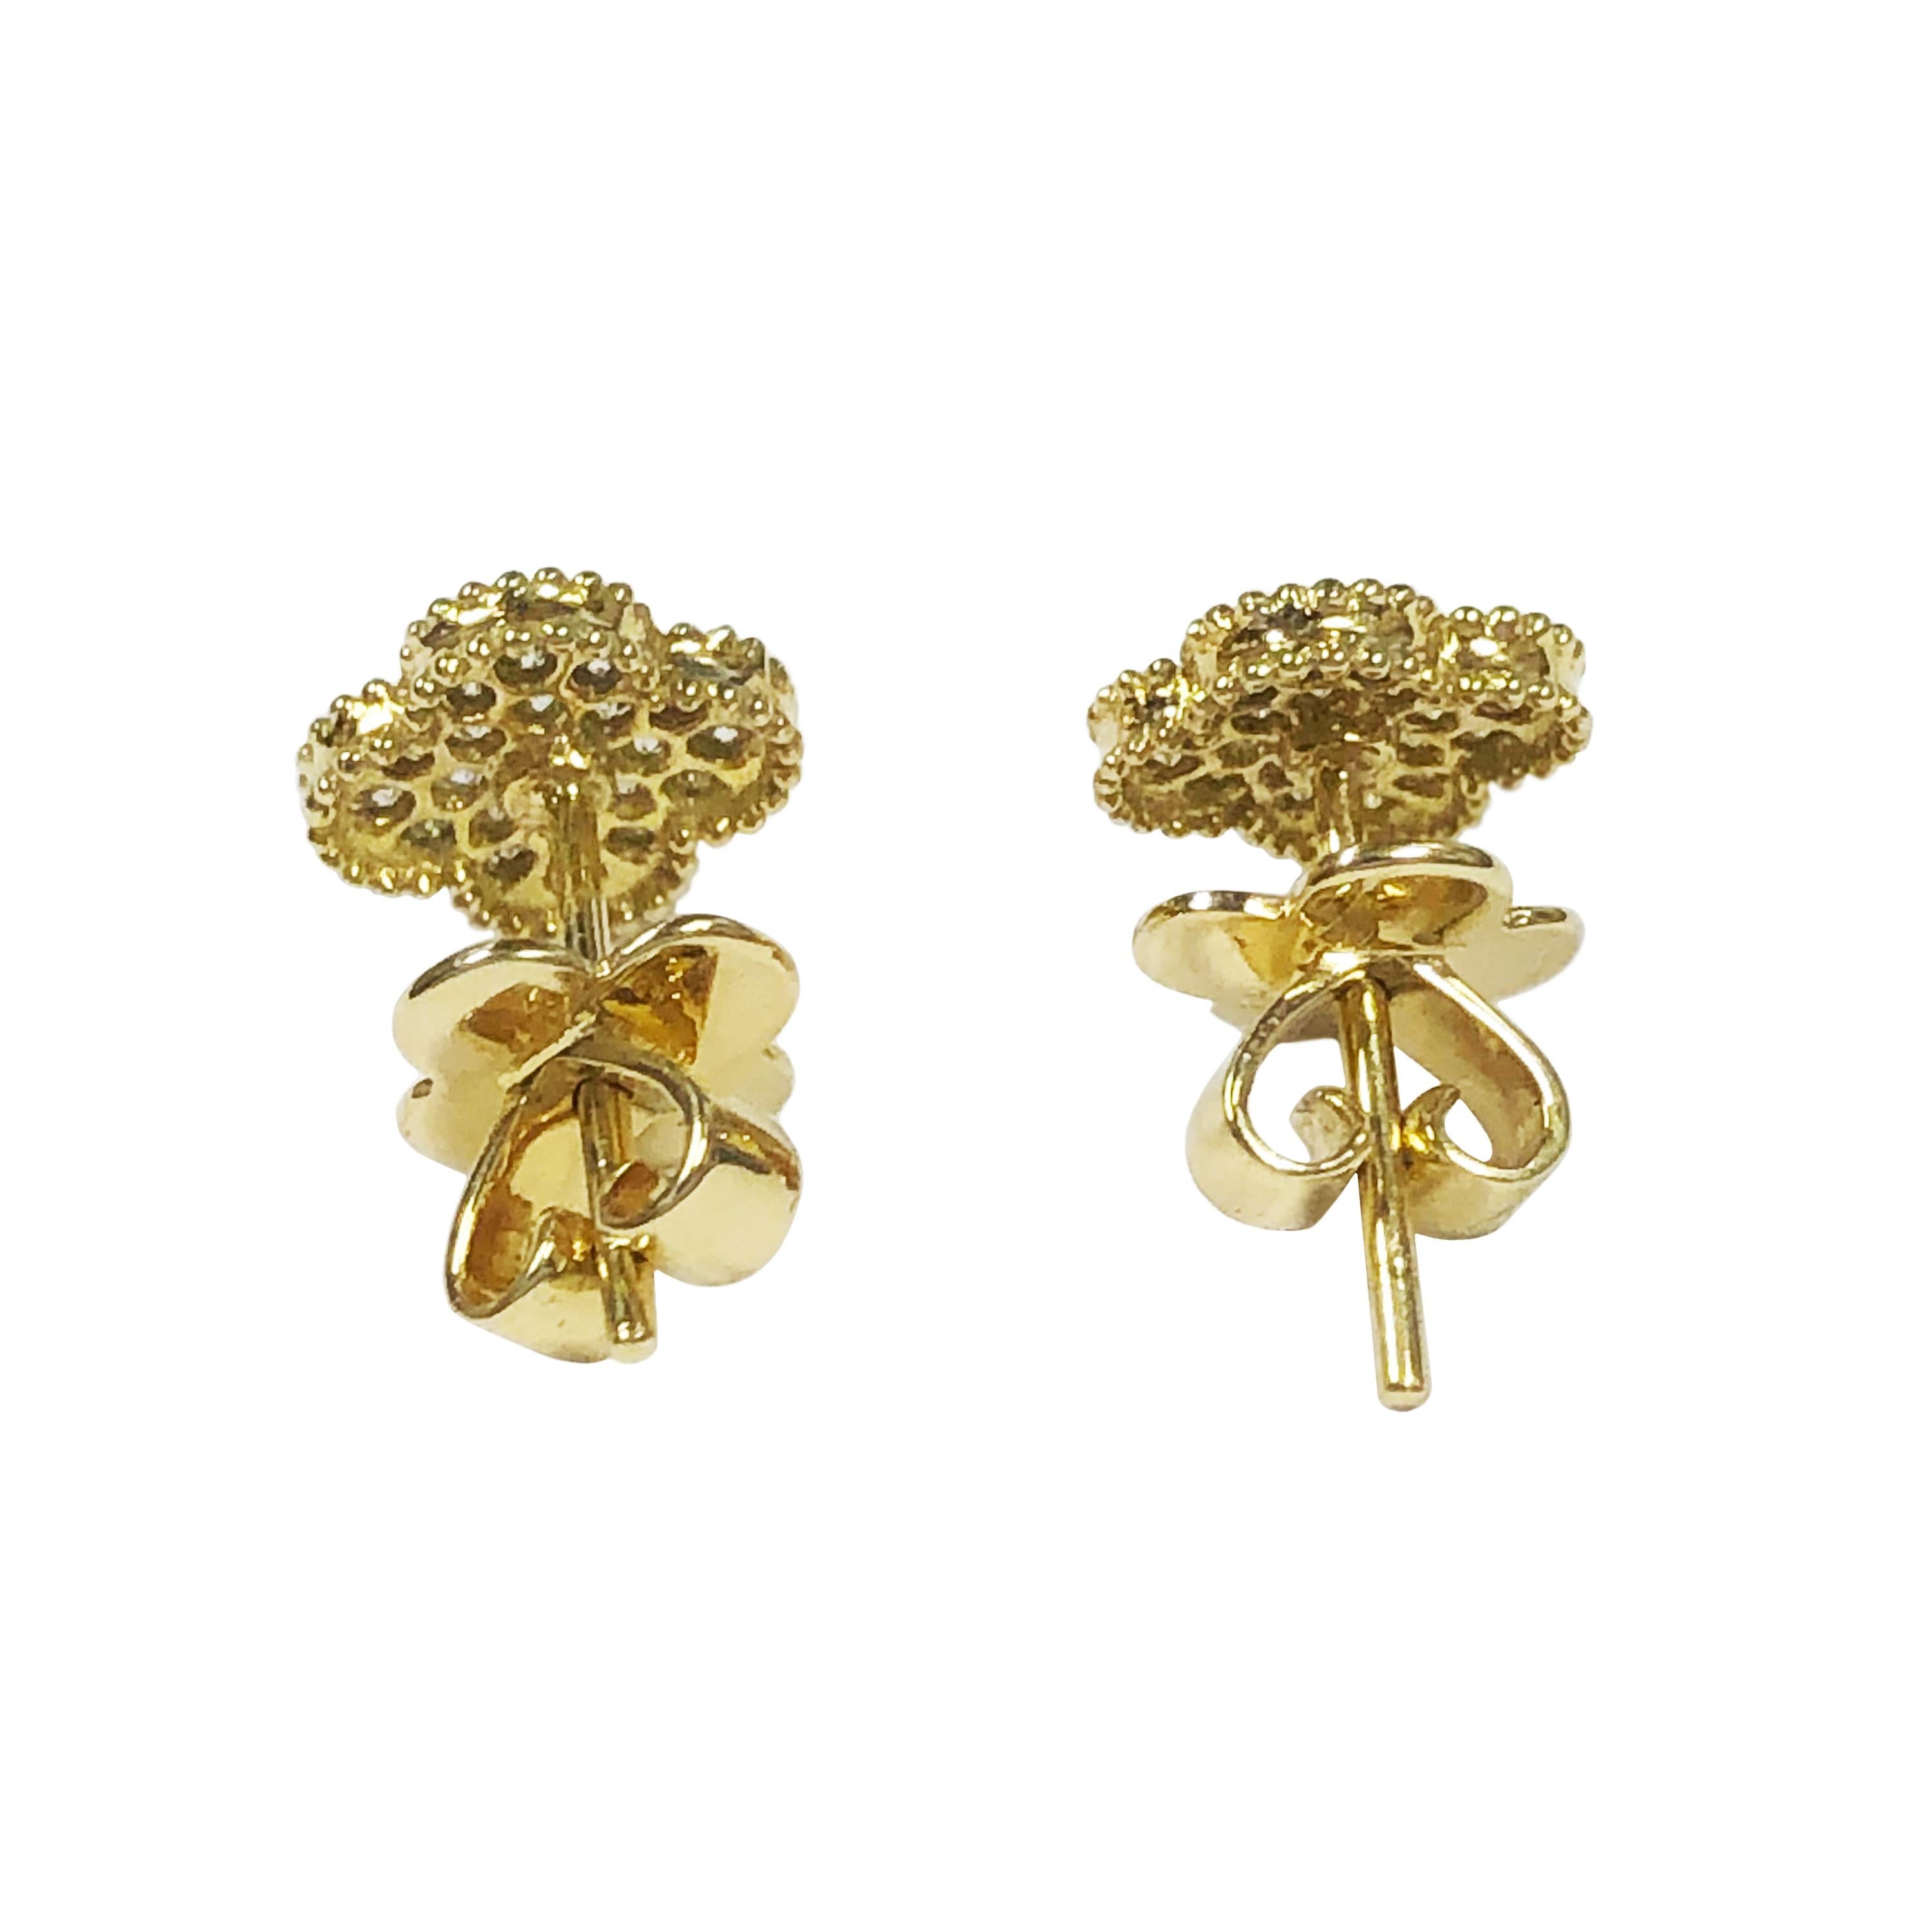 Circa 2015 Van Cleef & Arpels Classic Vintage collection Alhambra Stud Earrings, 18K Yellow Gold and Measuring 3/8 X 3/8 Inch and set with 42 Round Brilliant cut Diamonds totaling 1/2 Carat. Post Backs and come in the original VCA Presentation box.